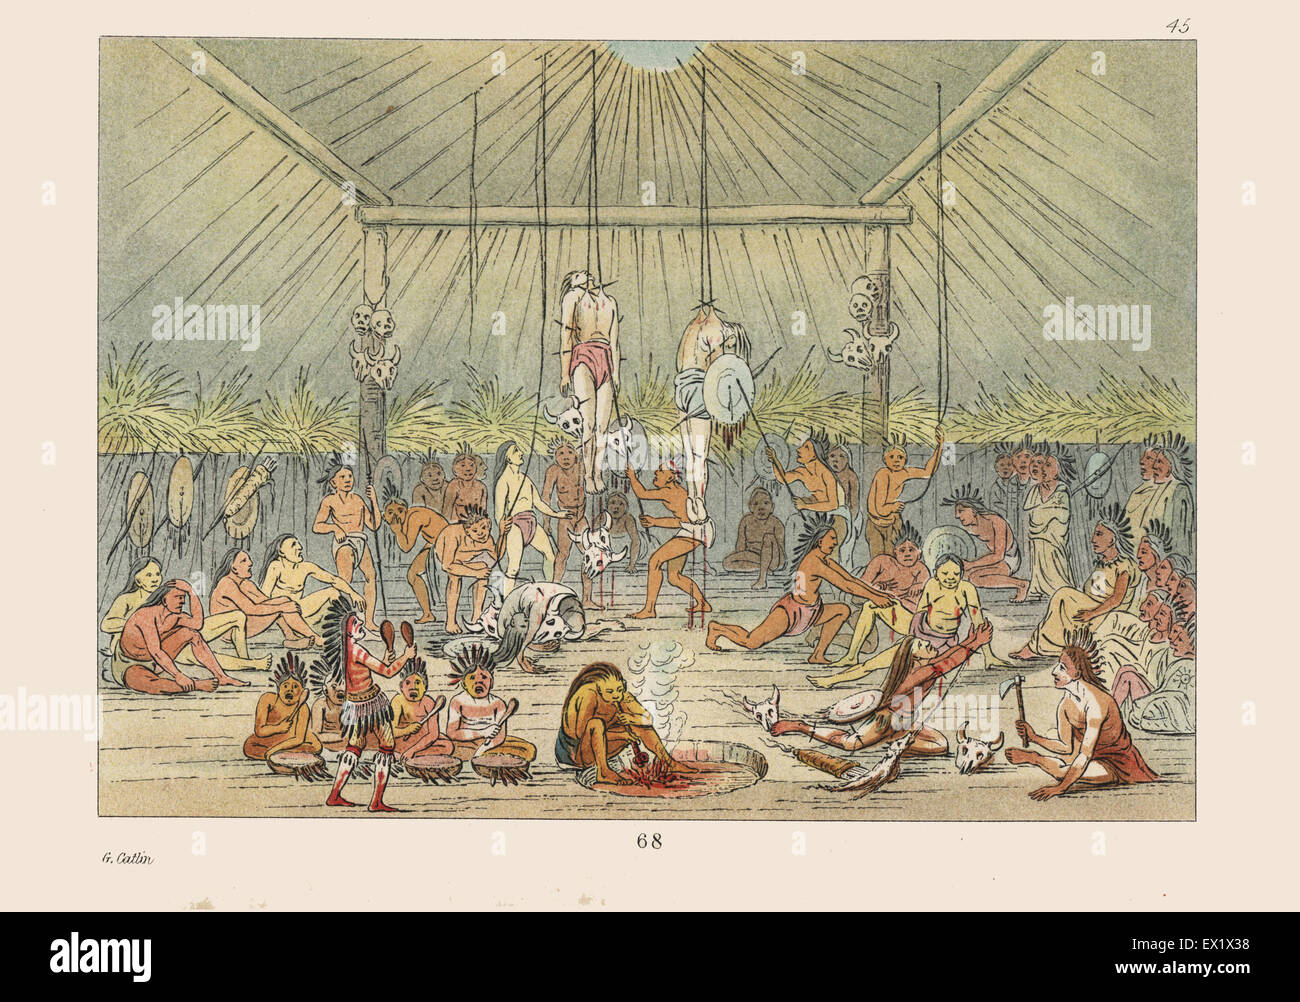 Mandan religious ceremony - the body suspension ritual, part of the four-day O-Kee-Pa buffalo dance. Young men are suspended by the skin from scaffolds and hung with shields and bison skulls. Handcoloured lithograph from George Catlin's Manners, Customs and Condition of the North American Indians, London, 1841. Stock Photo